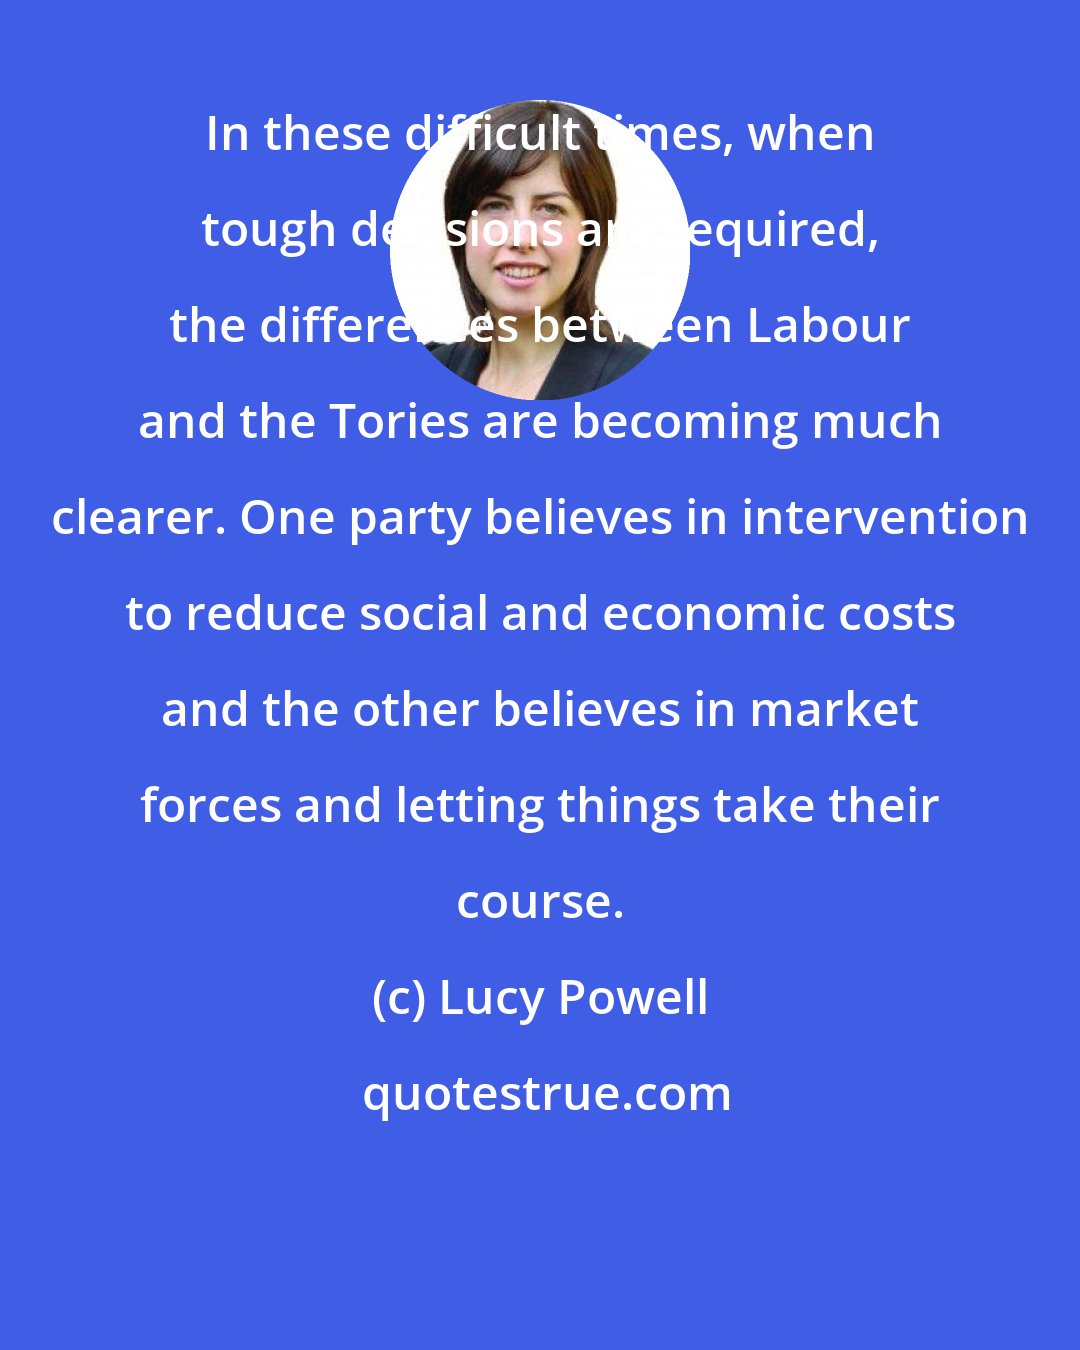 Lucy Powell: In these difficult times, when tough decisions are required, the differences between Labour and the Tories are becoming much clearer. One party believes in intervention to reduce social and economic costs and the other believes in market forces and letting things take their course.